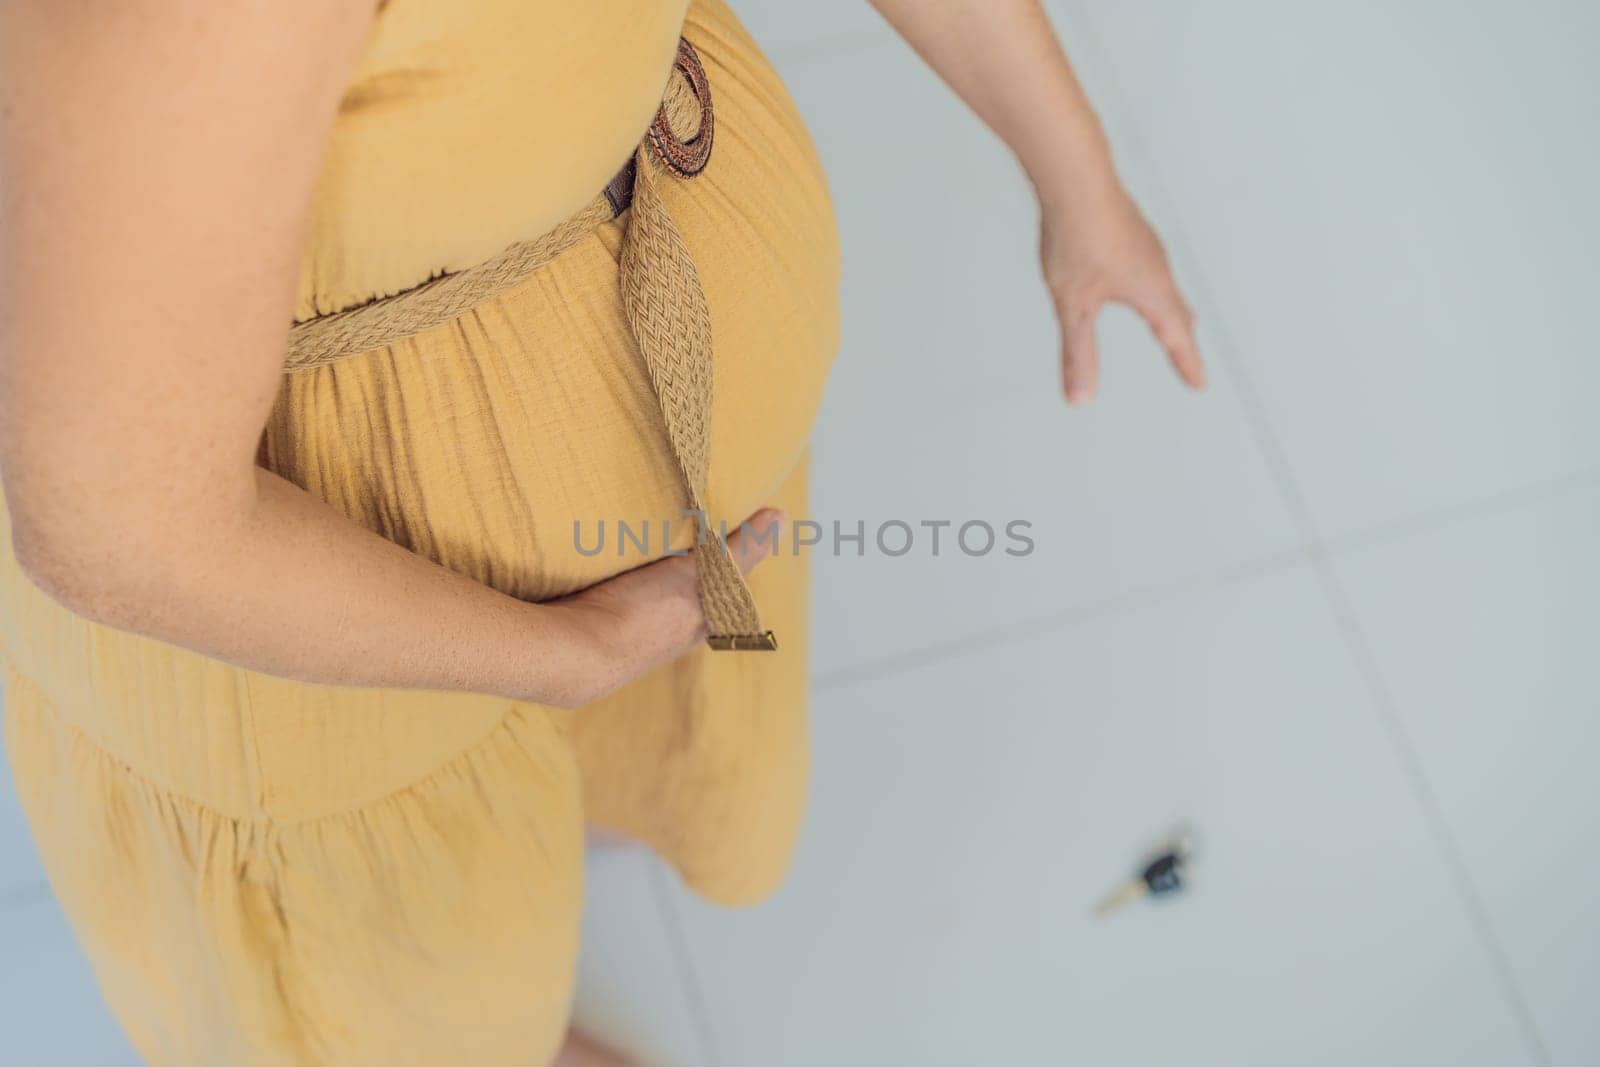 Facing a momentary challenge, a pregnant woman drops her keys and struggles to pick them up, highlighting the physical limitations that can arise during pregnancy. Patience and support become essential.